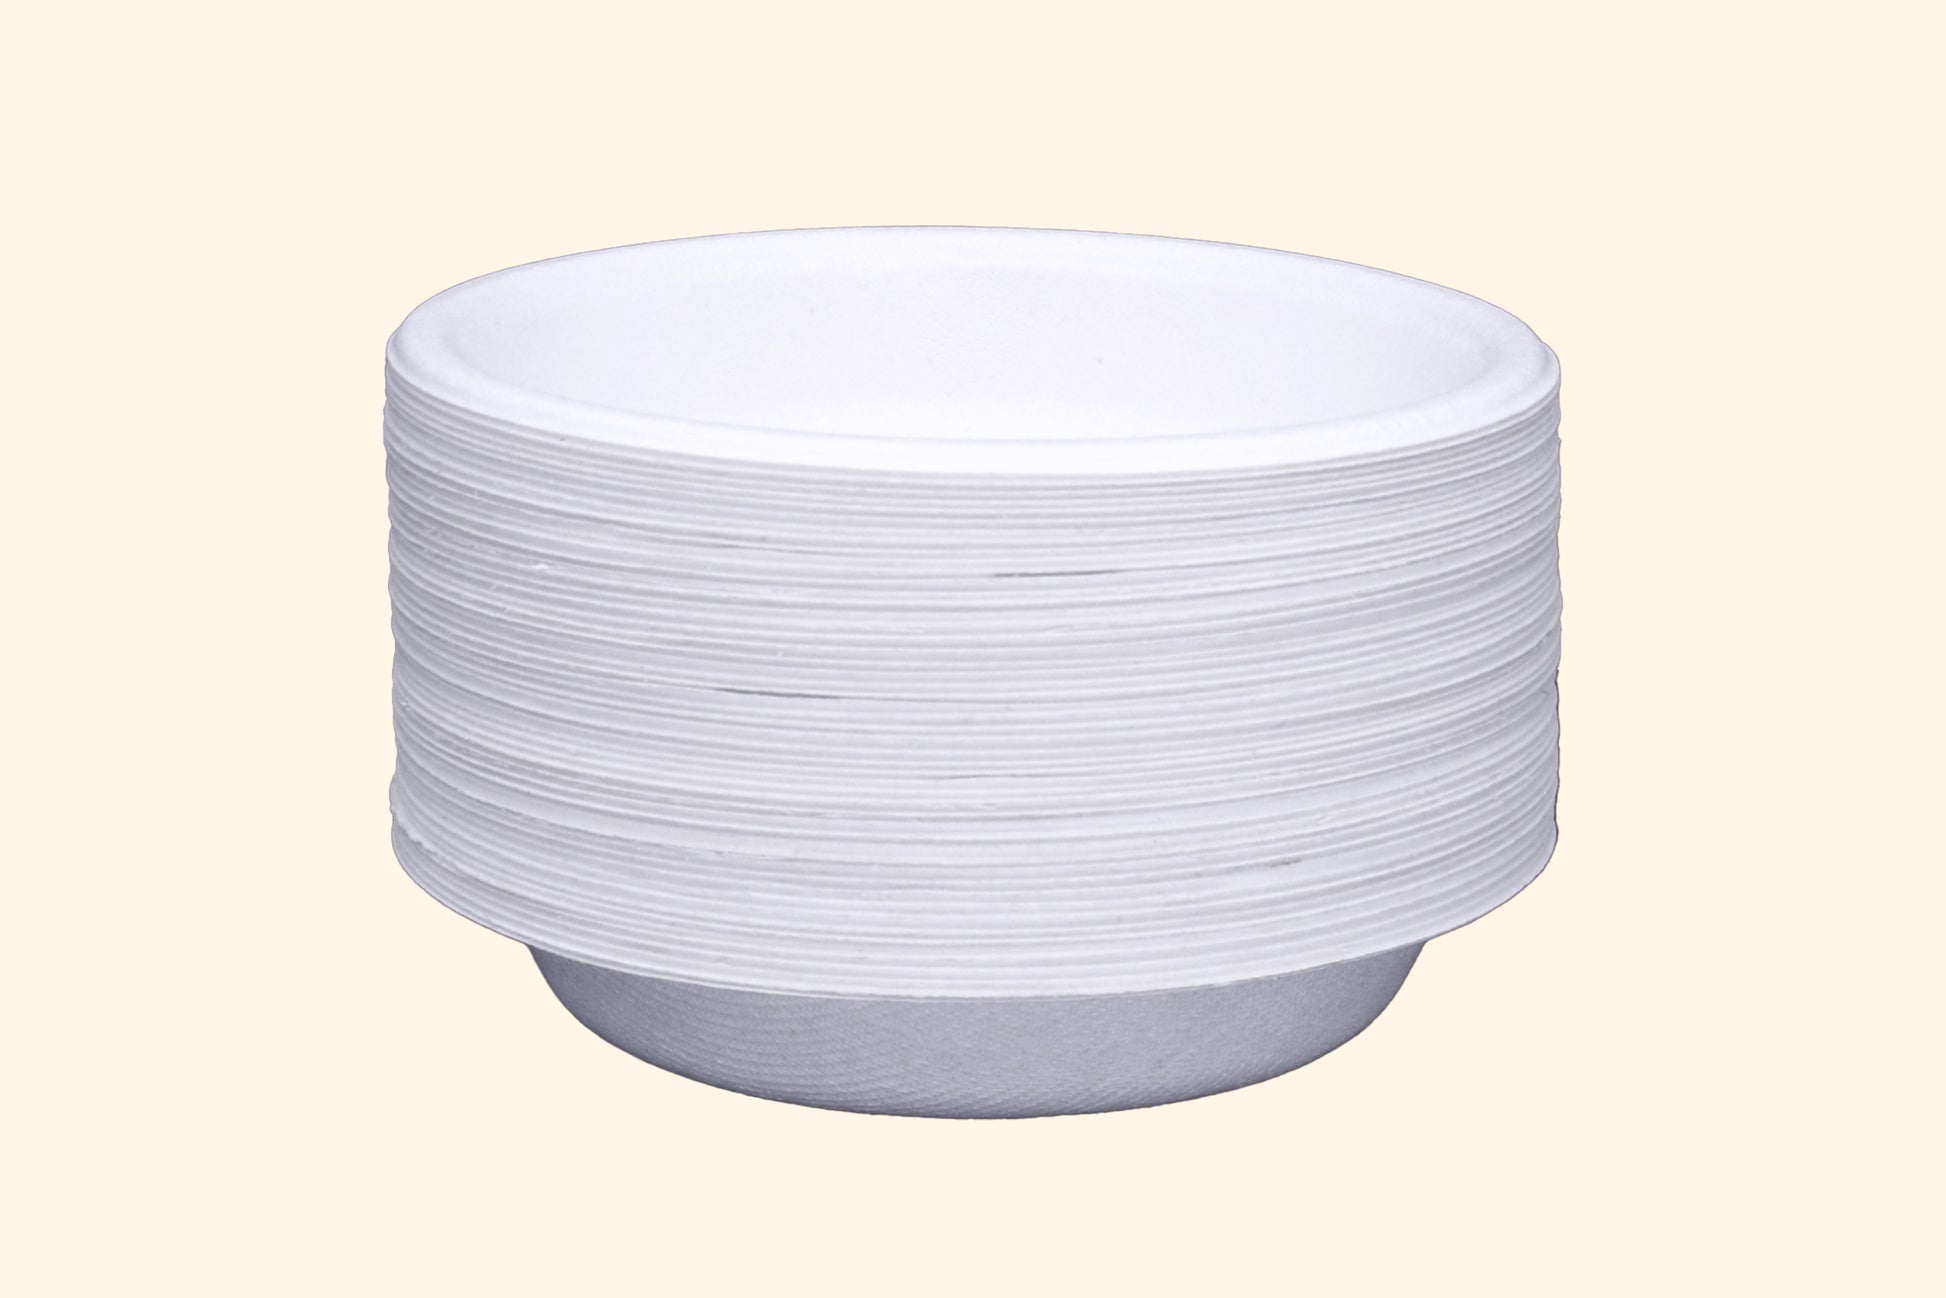 6-Inch-Deep-Round-Plates-Compostable-Sugarcane-Bagasse-Plate